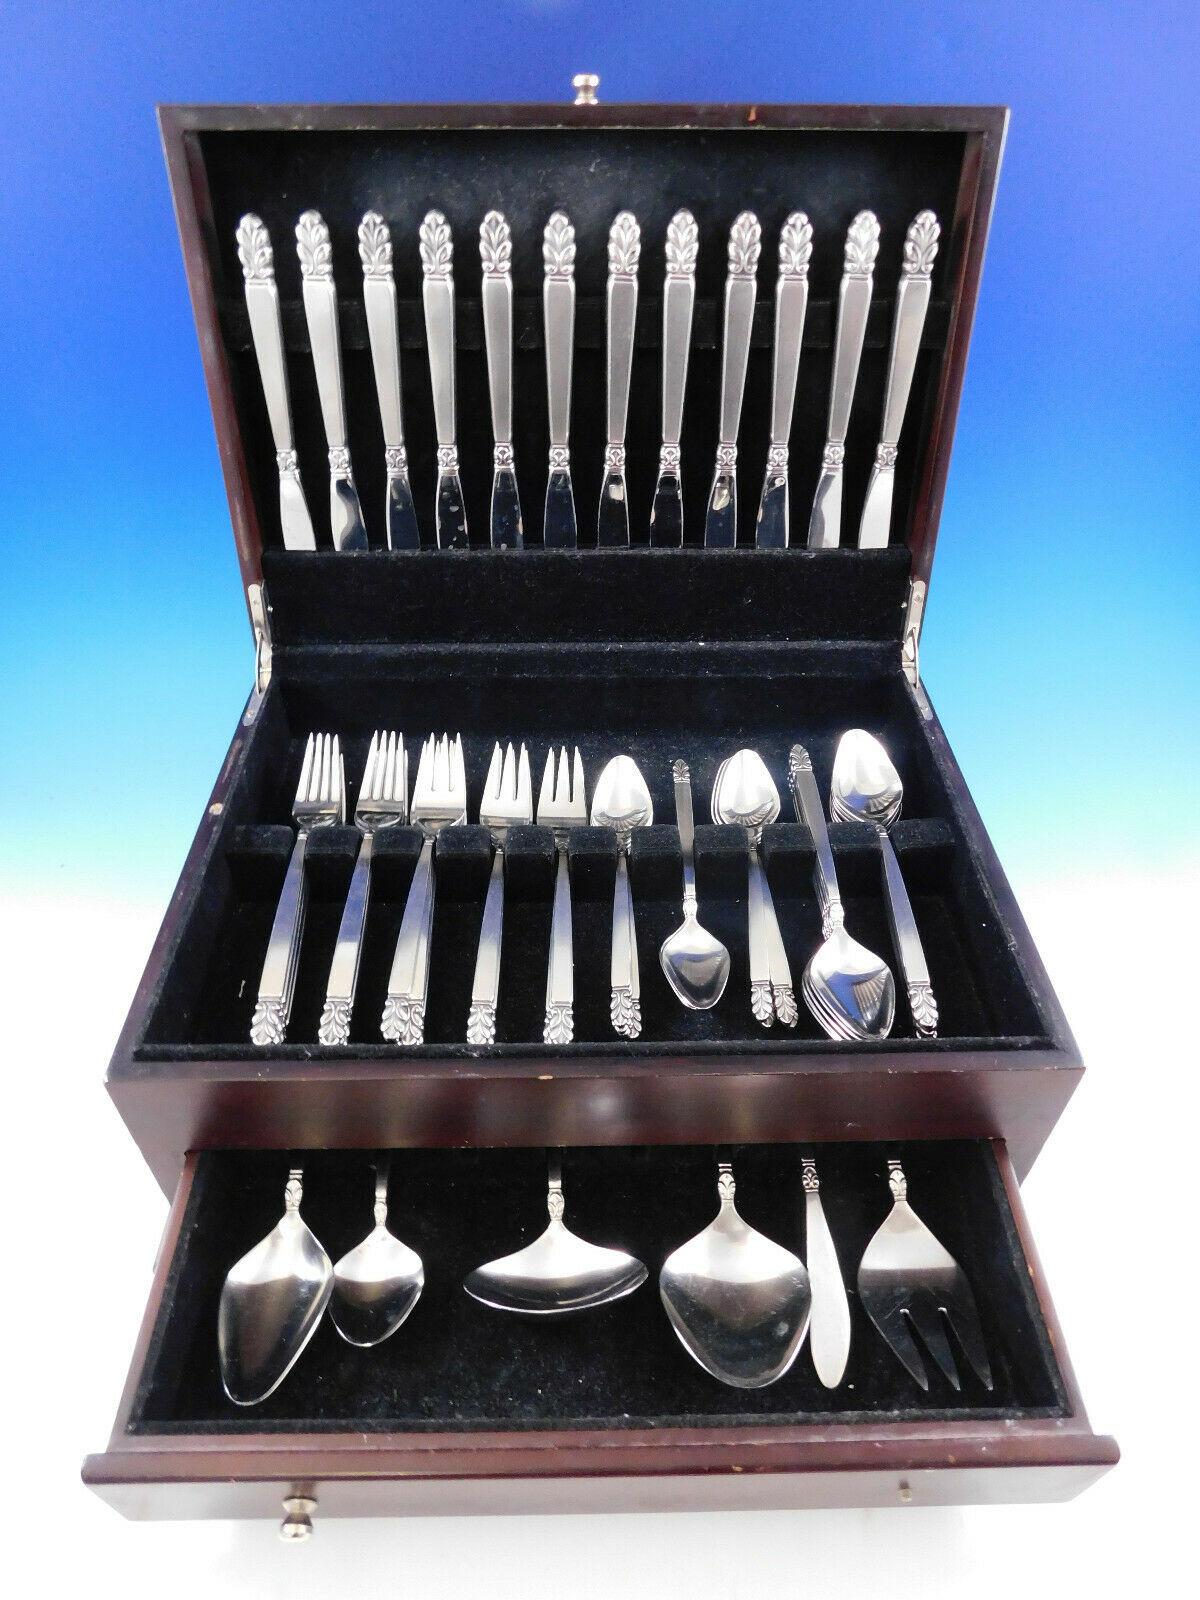 Norse by International stainless steel Flatware set - 66 Pieces. This set includes:

12 Knives, 8 7/8